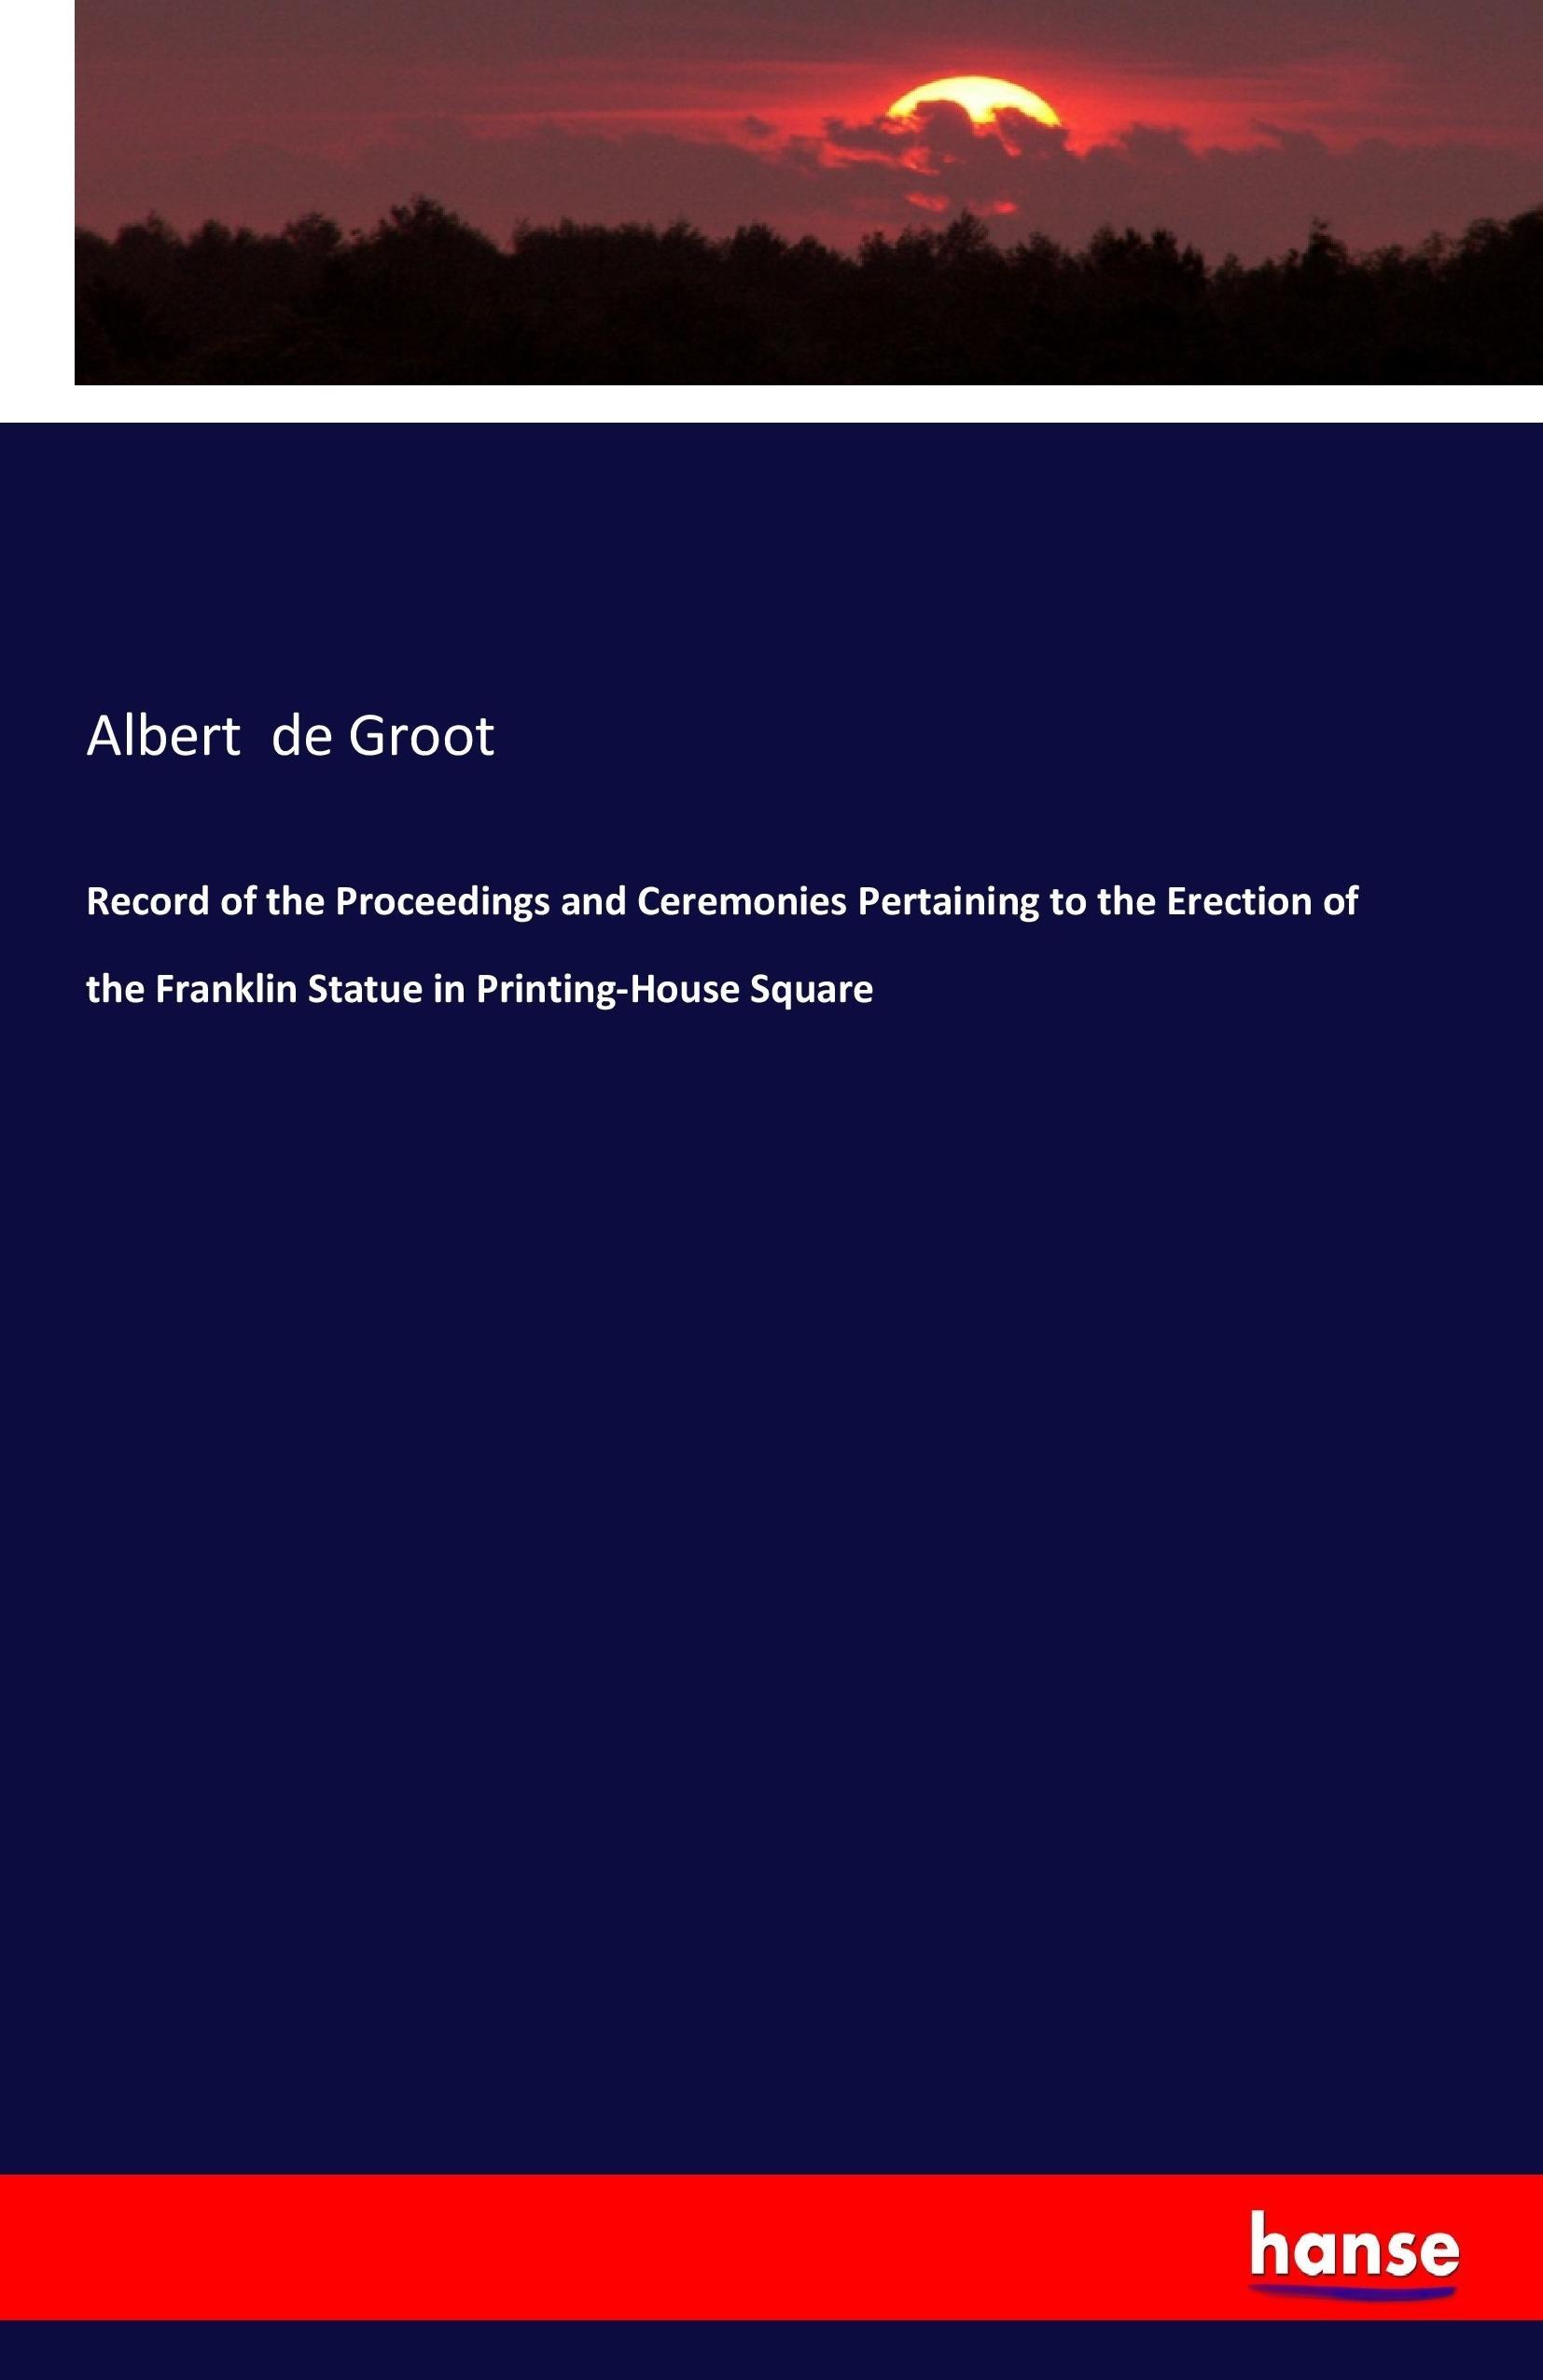 Record of the Proceedings and Ceremonies Pertaining to the Erection of the Franklin Statue in Printing-House Square - De Groot, Albert